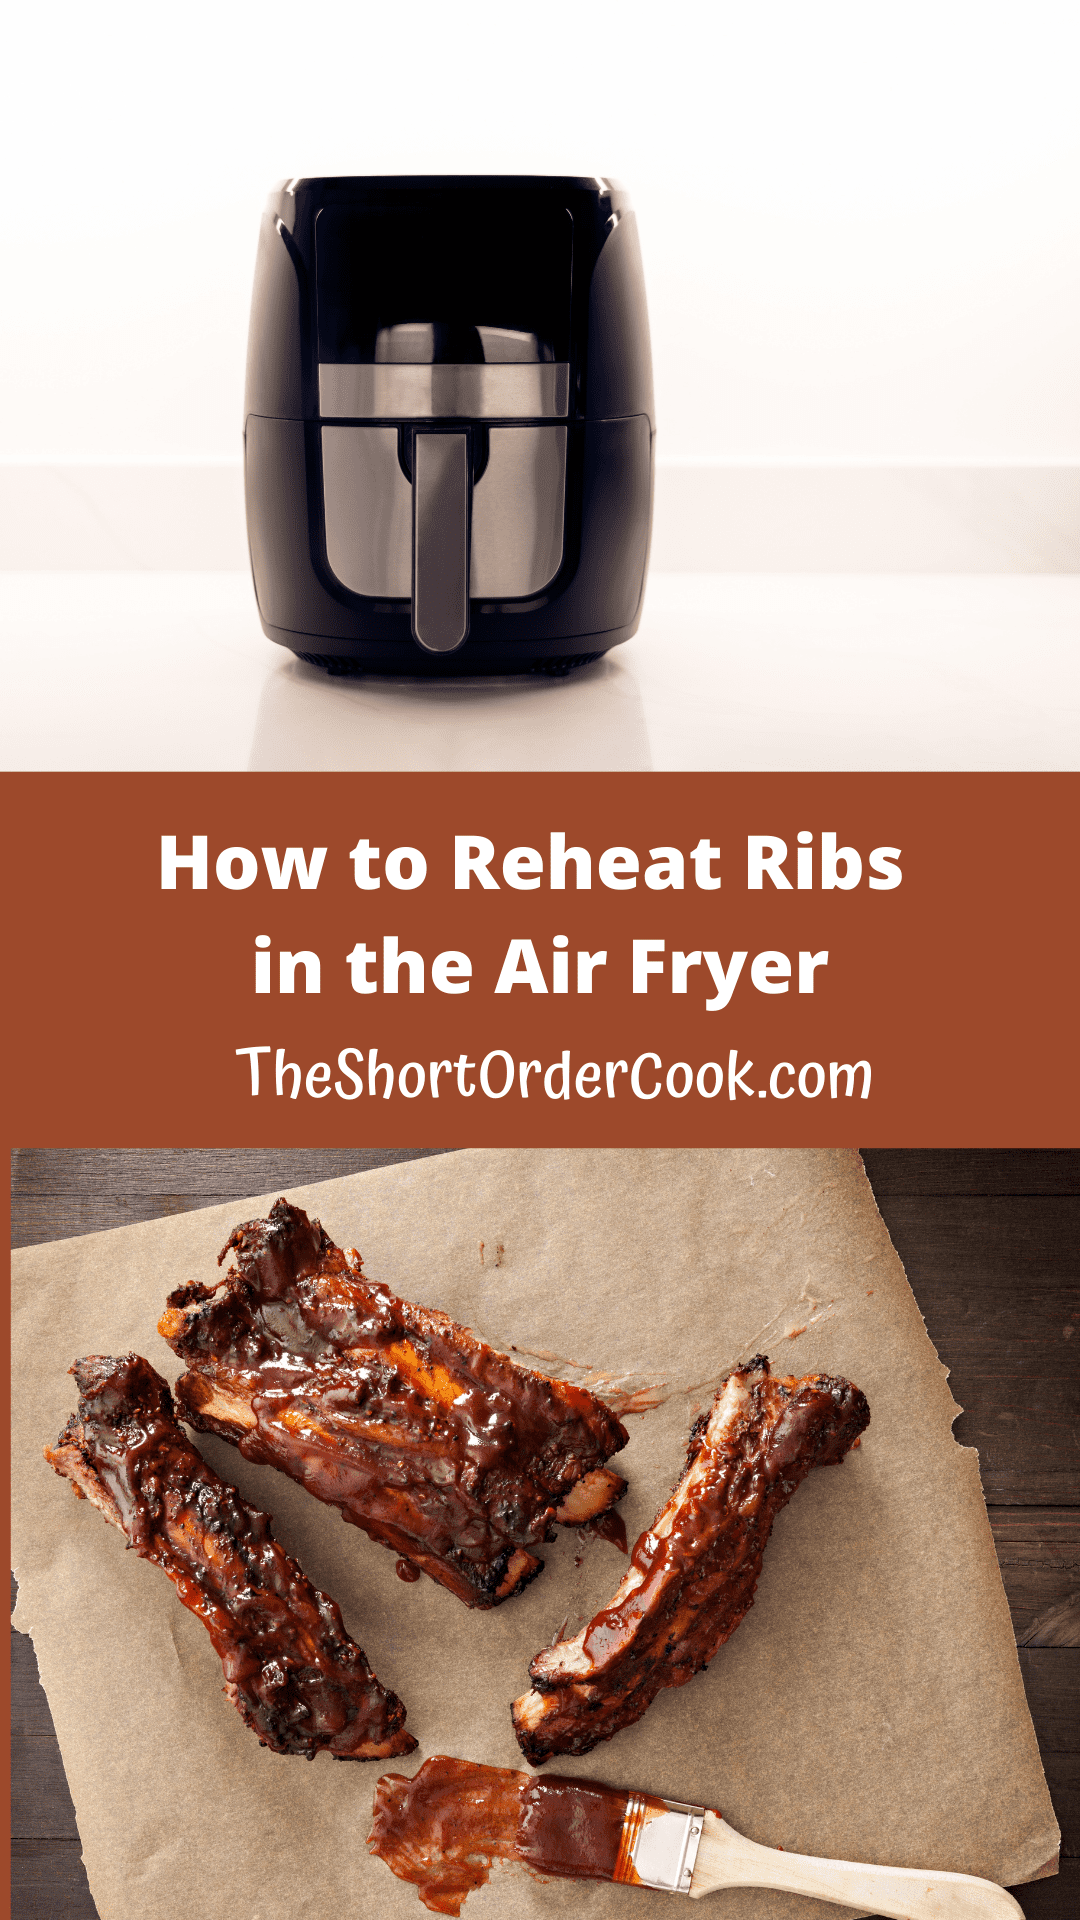 Photos of an air fryer and parchment paper with ribs on top.